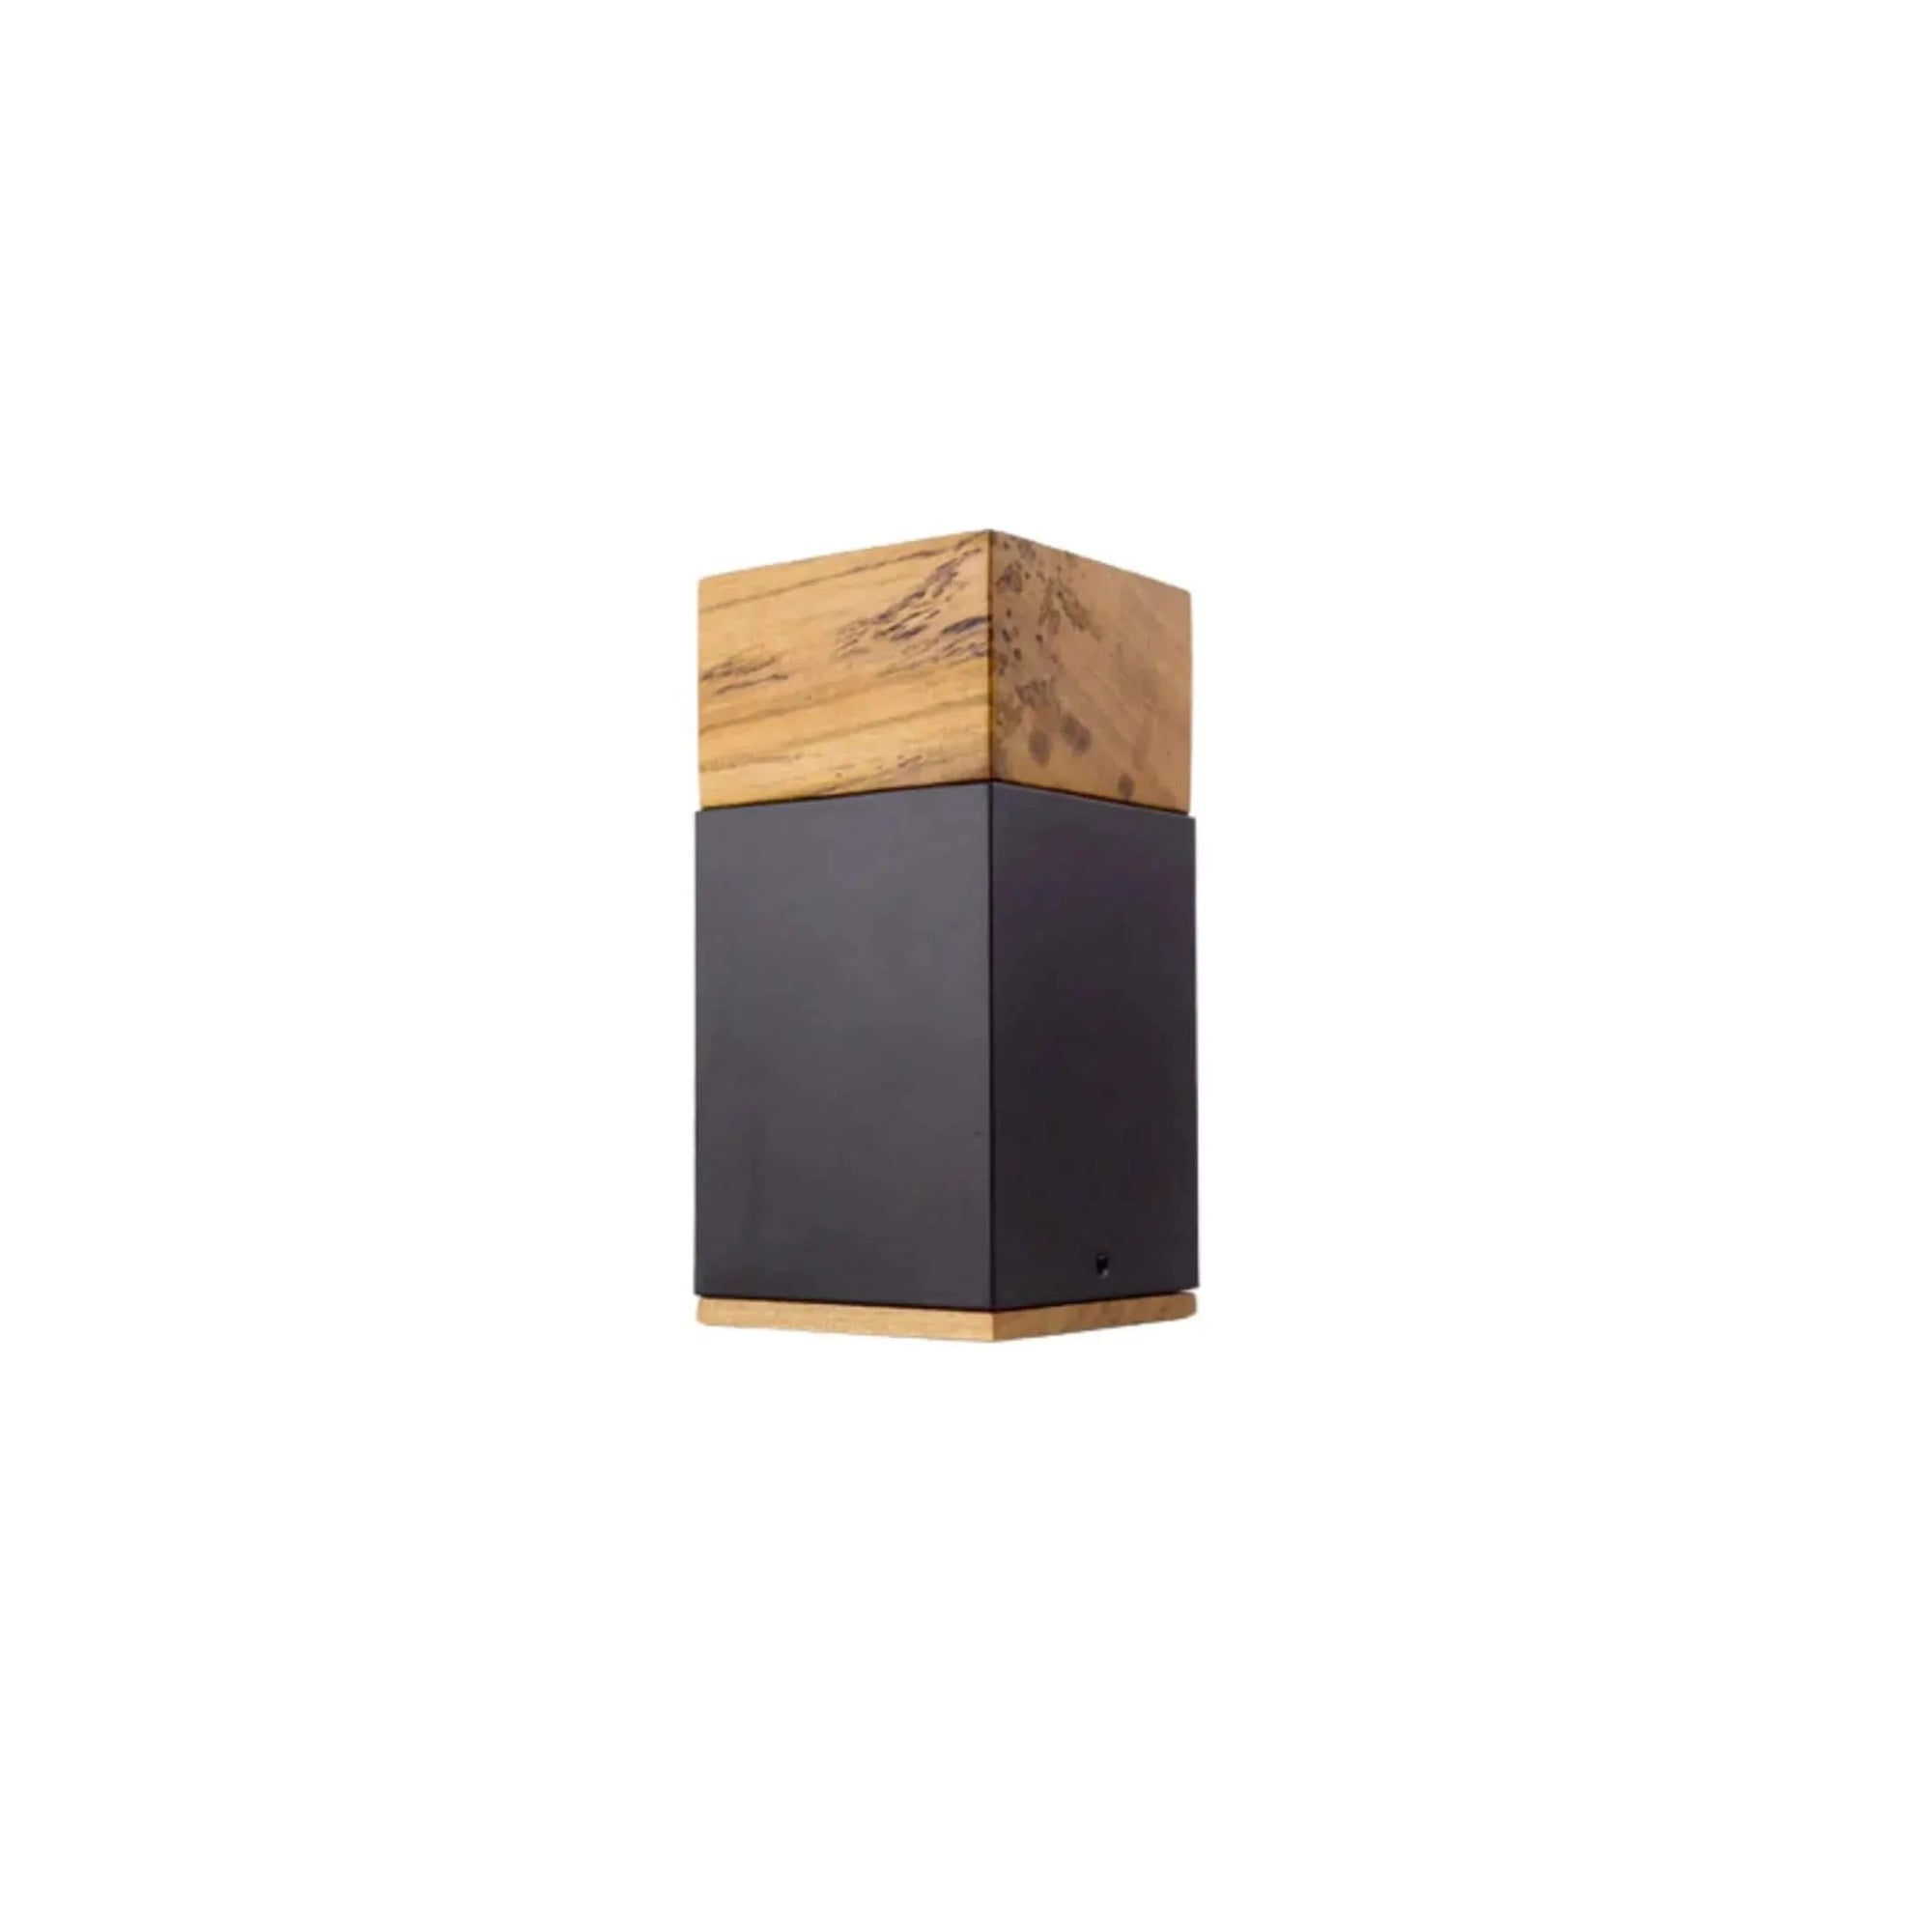 Load image into Gallery viewer, Wood Pet Urn - The Langley in Poplar
